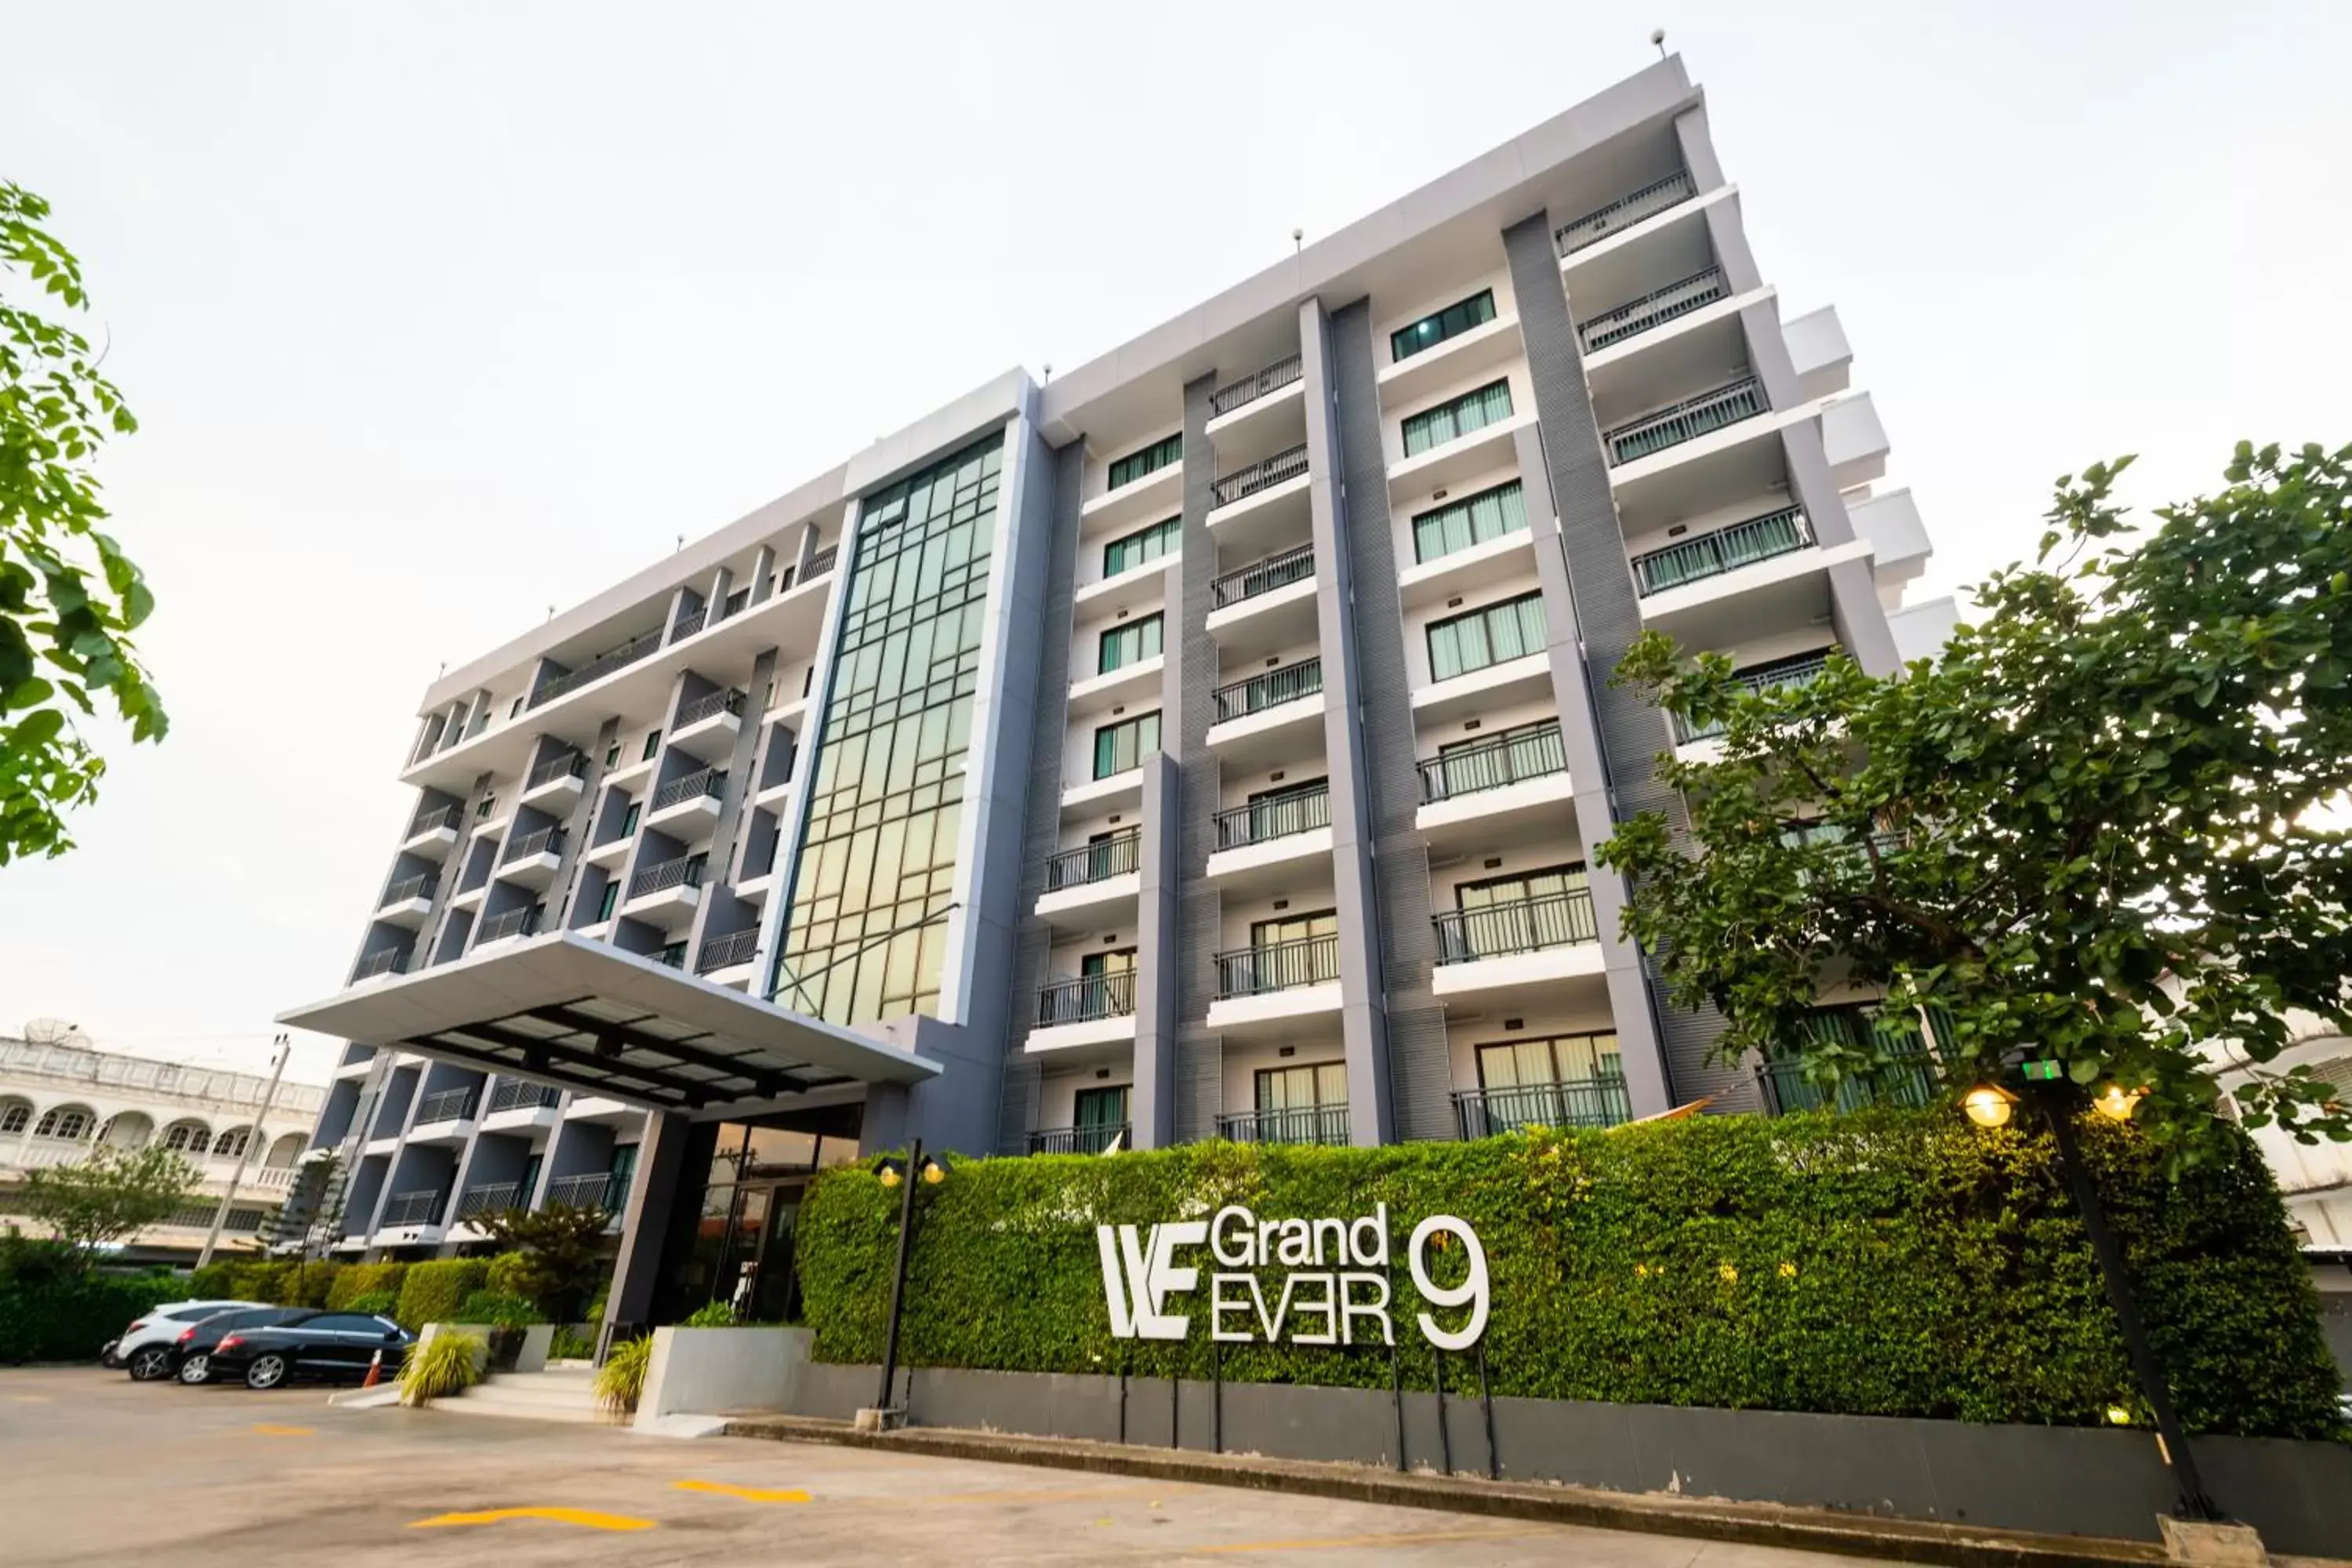 Property Building in We Grand Ever 9